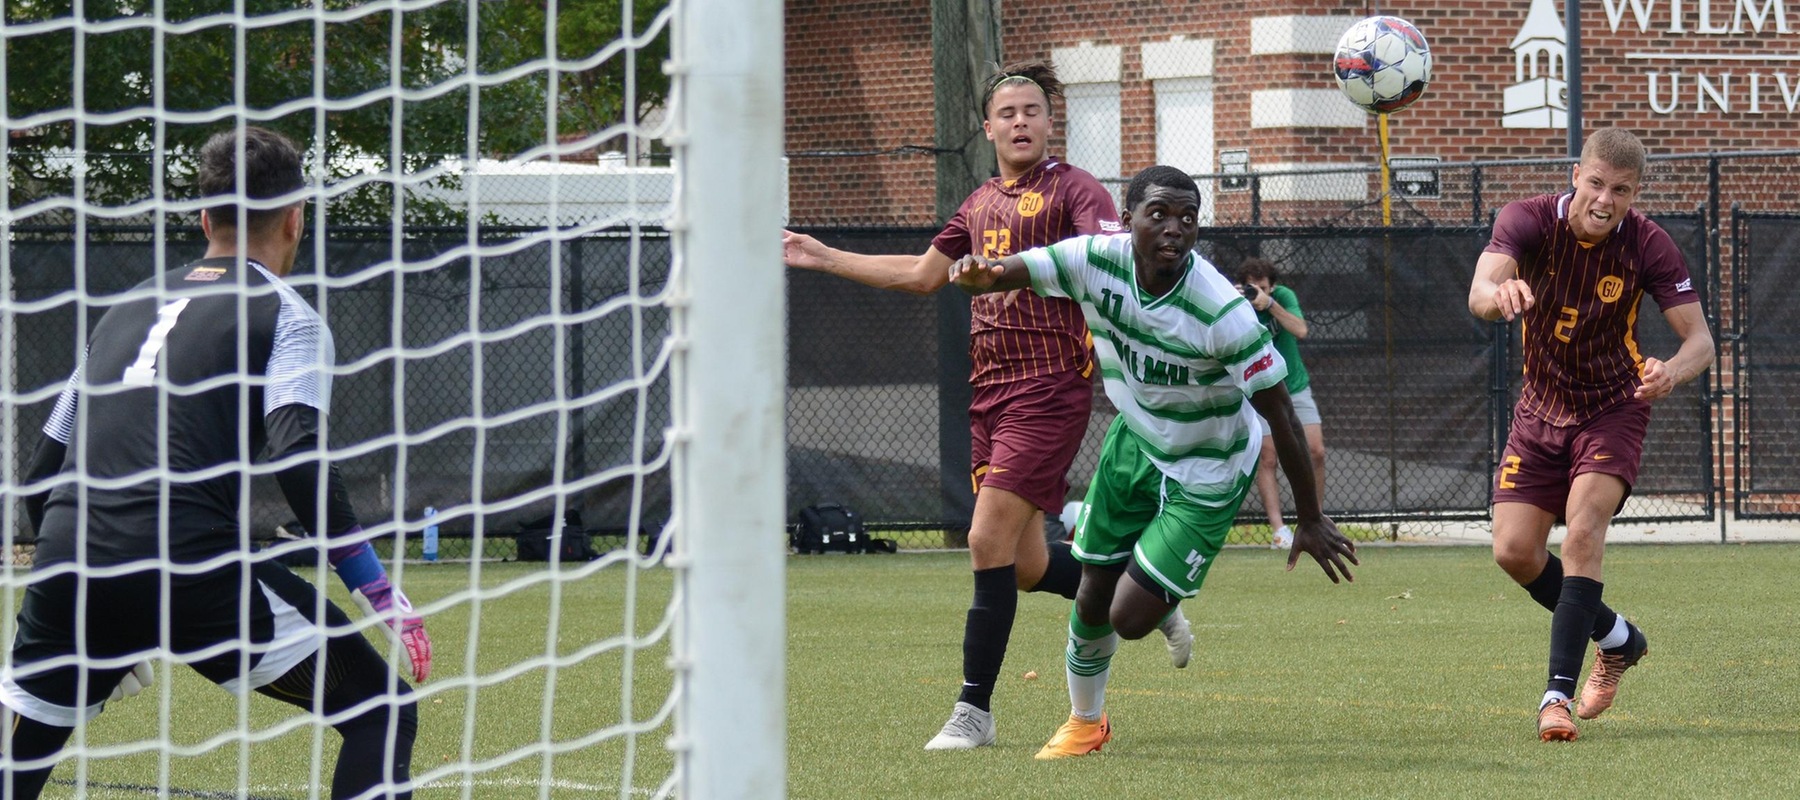 Wilmington University’s Troy Paul #11 controls the ball while Gannon University player Lennox Crews #22 pursues during their NCAA Men’s soccer match at the Wilmington University Sports complex in Newark, Delaware, September 9, 2023. Photo by Debra Breister.